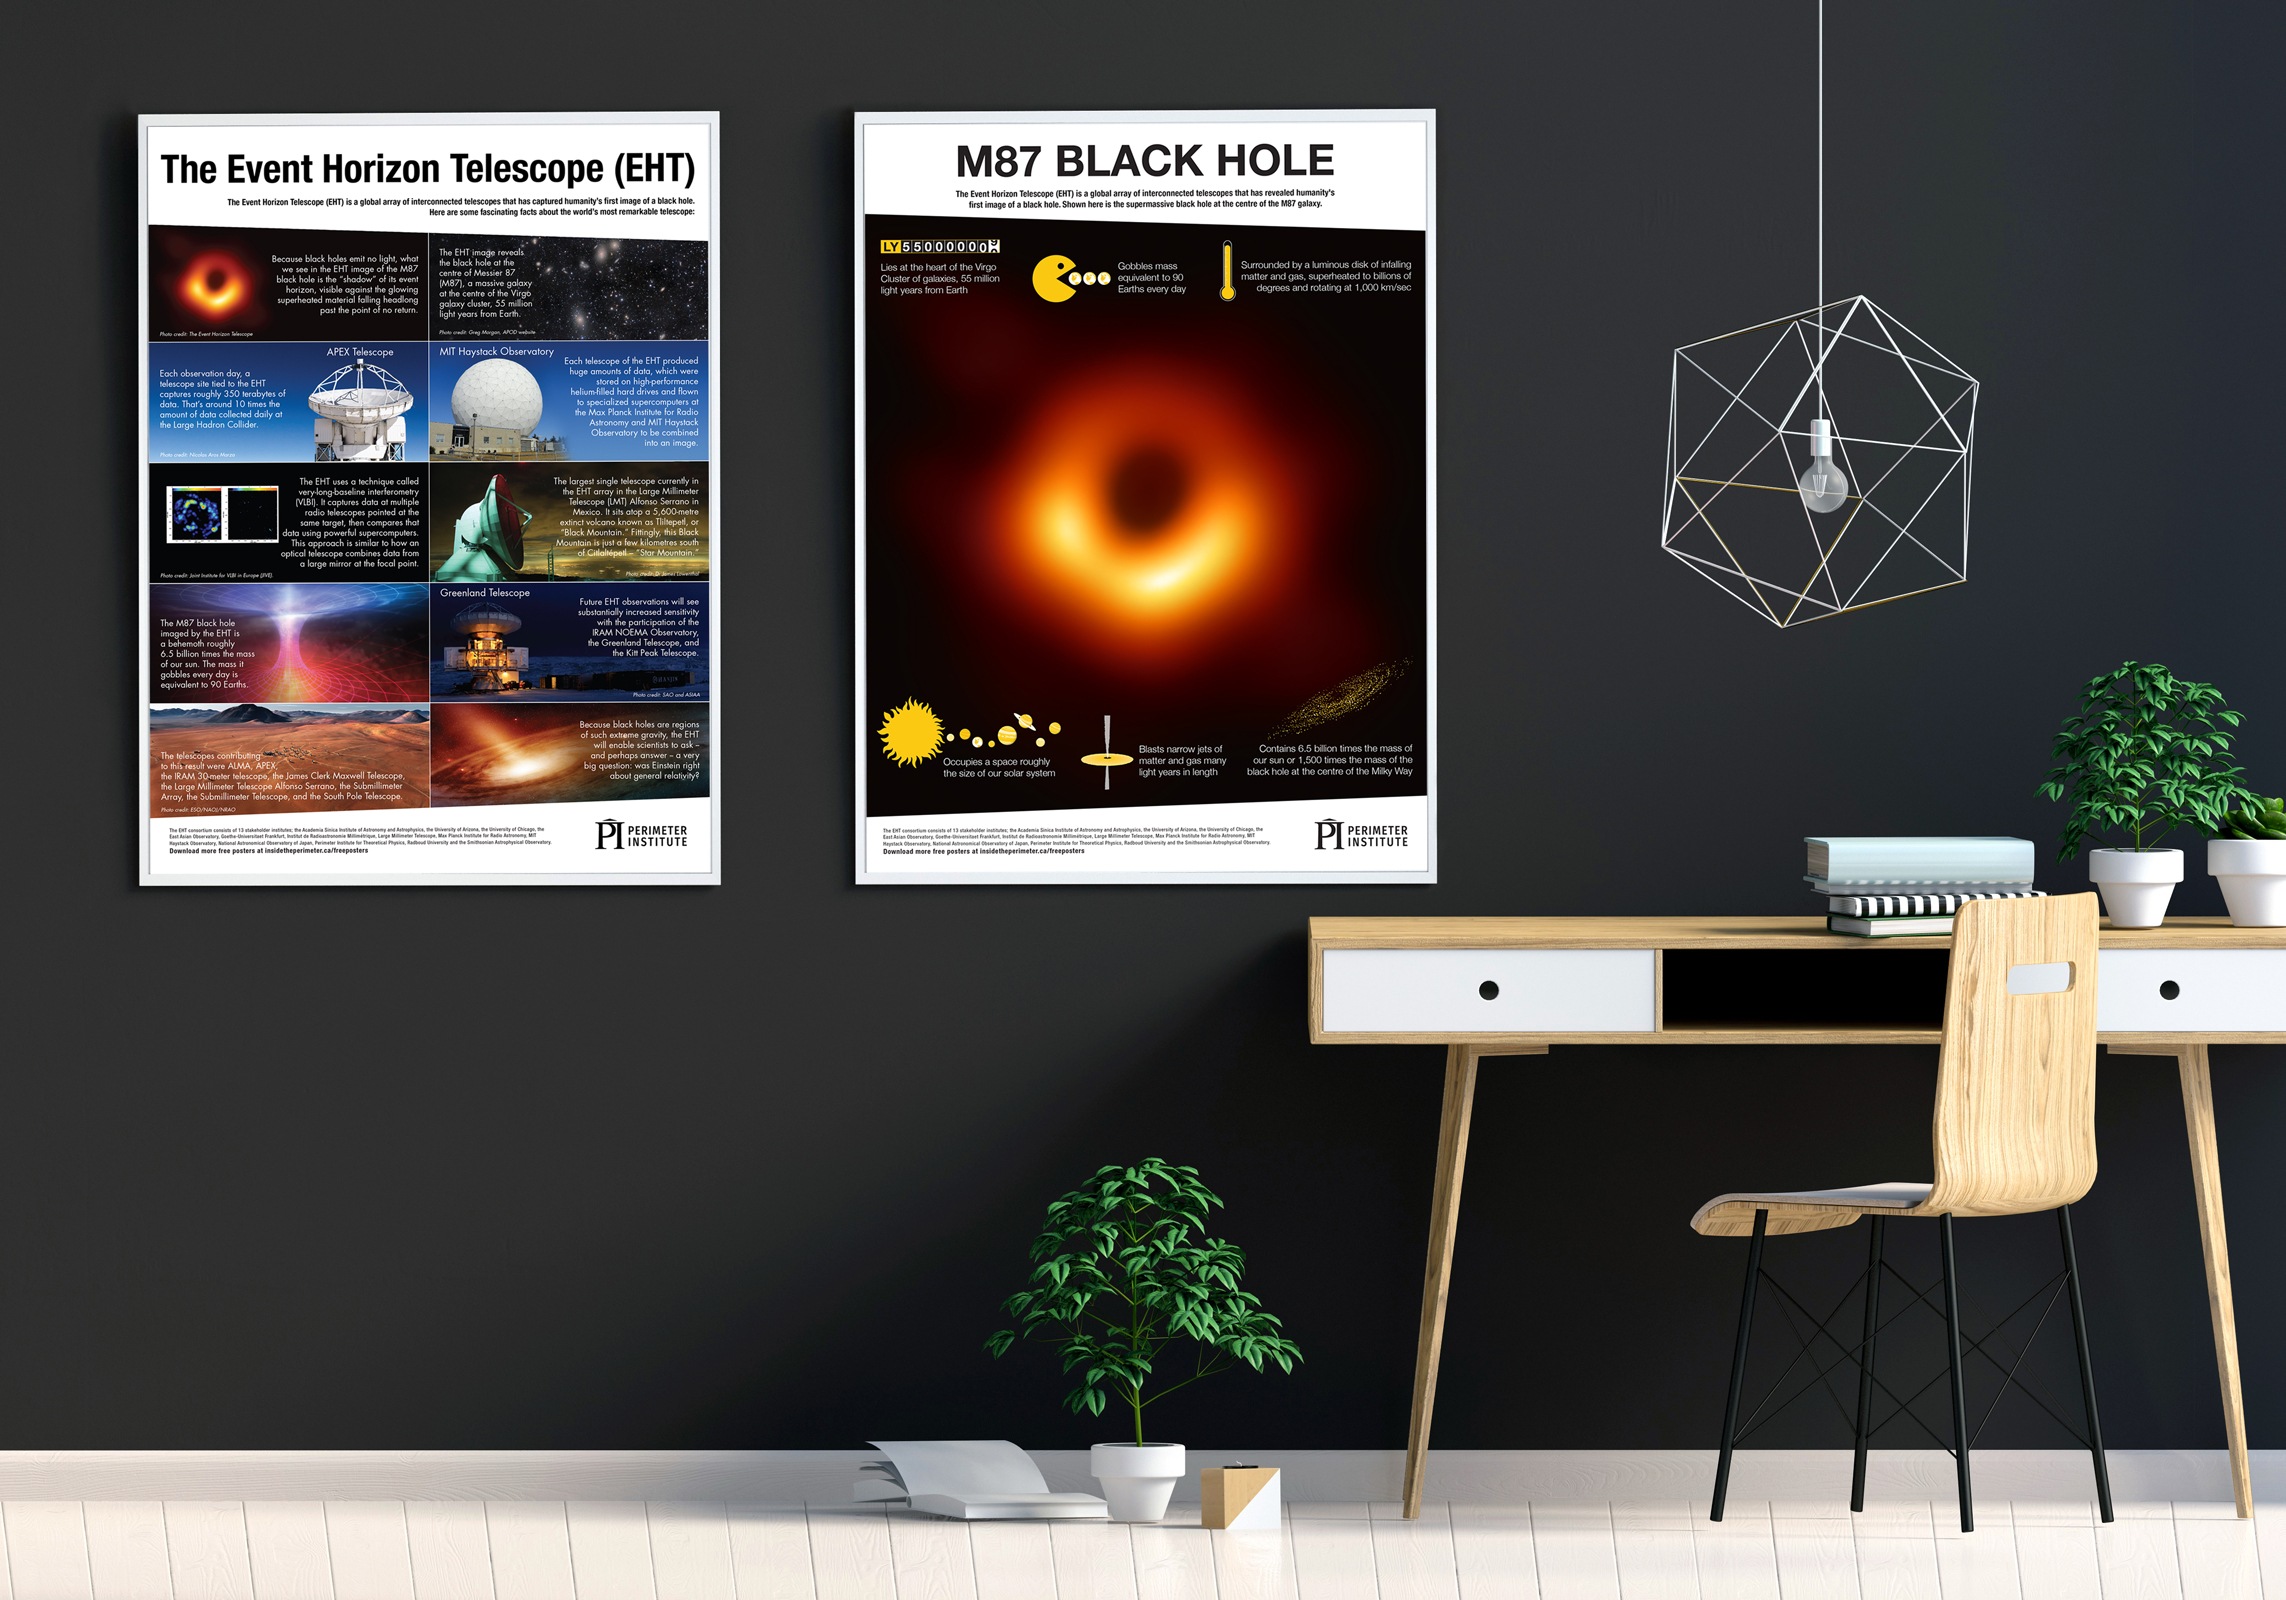 large posters in a stylish office showing the EHT and the first black hole image